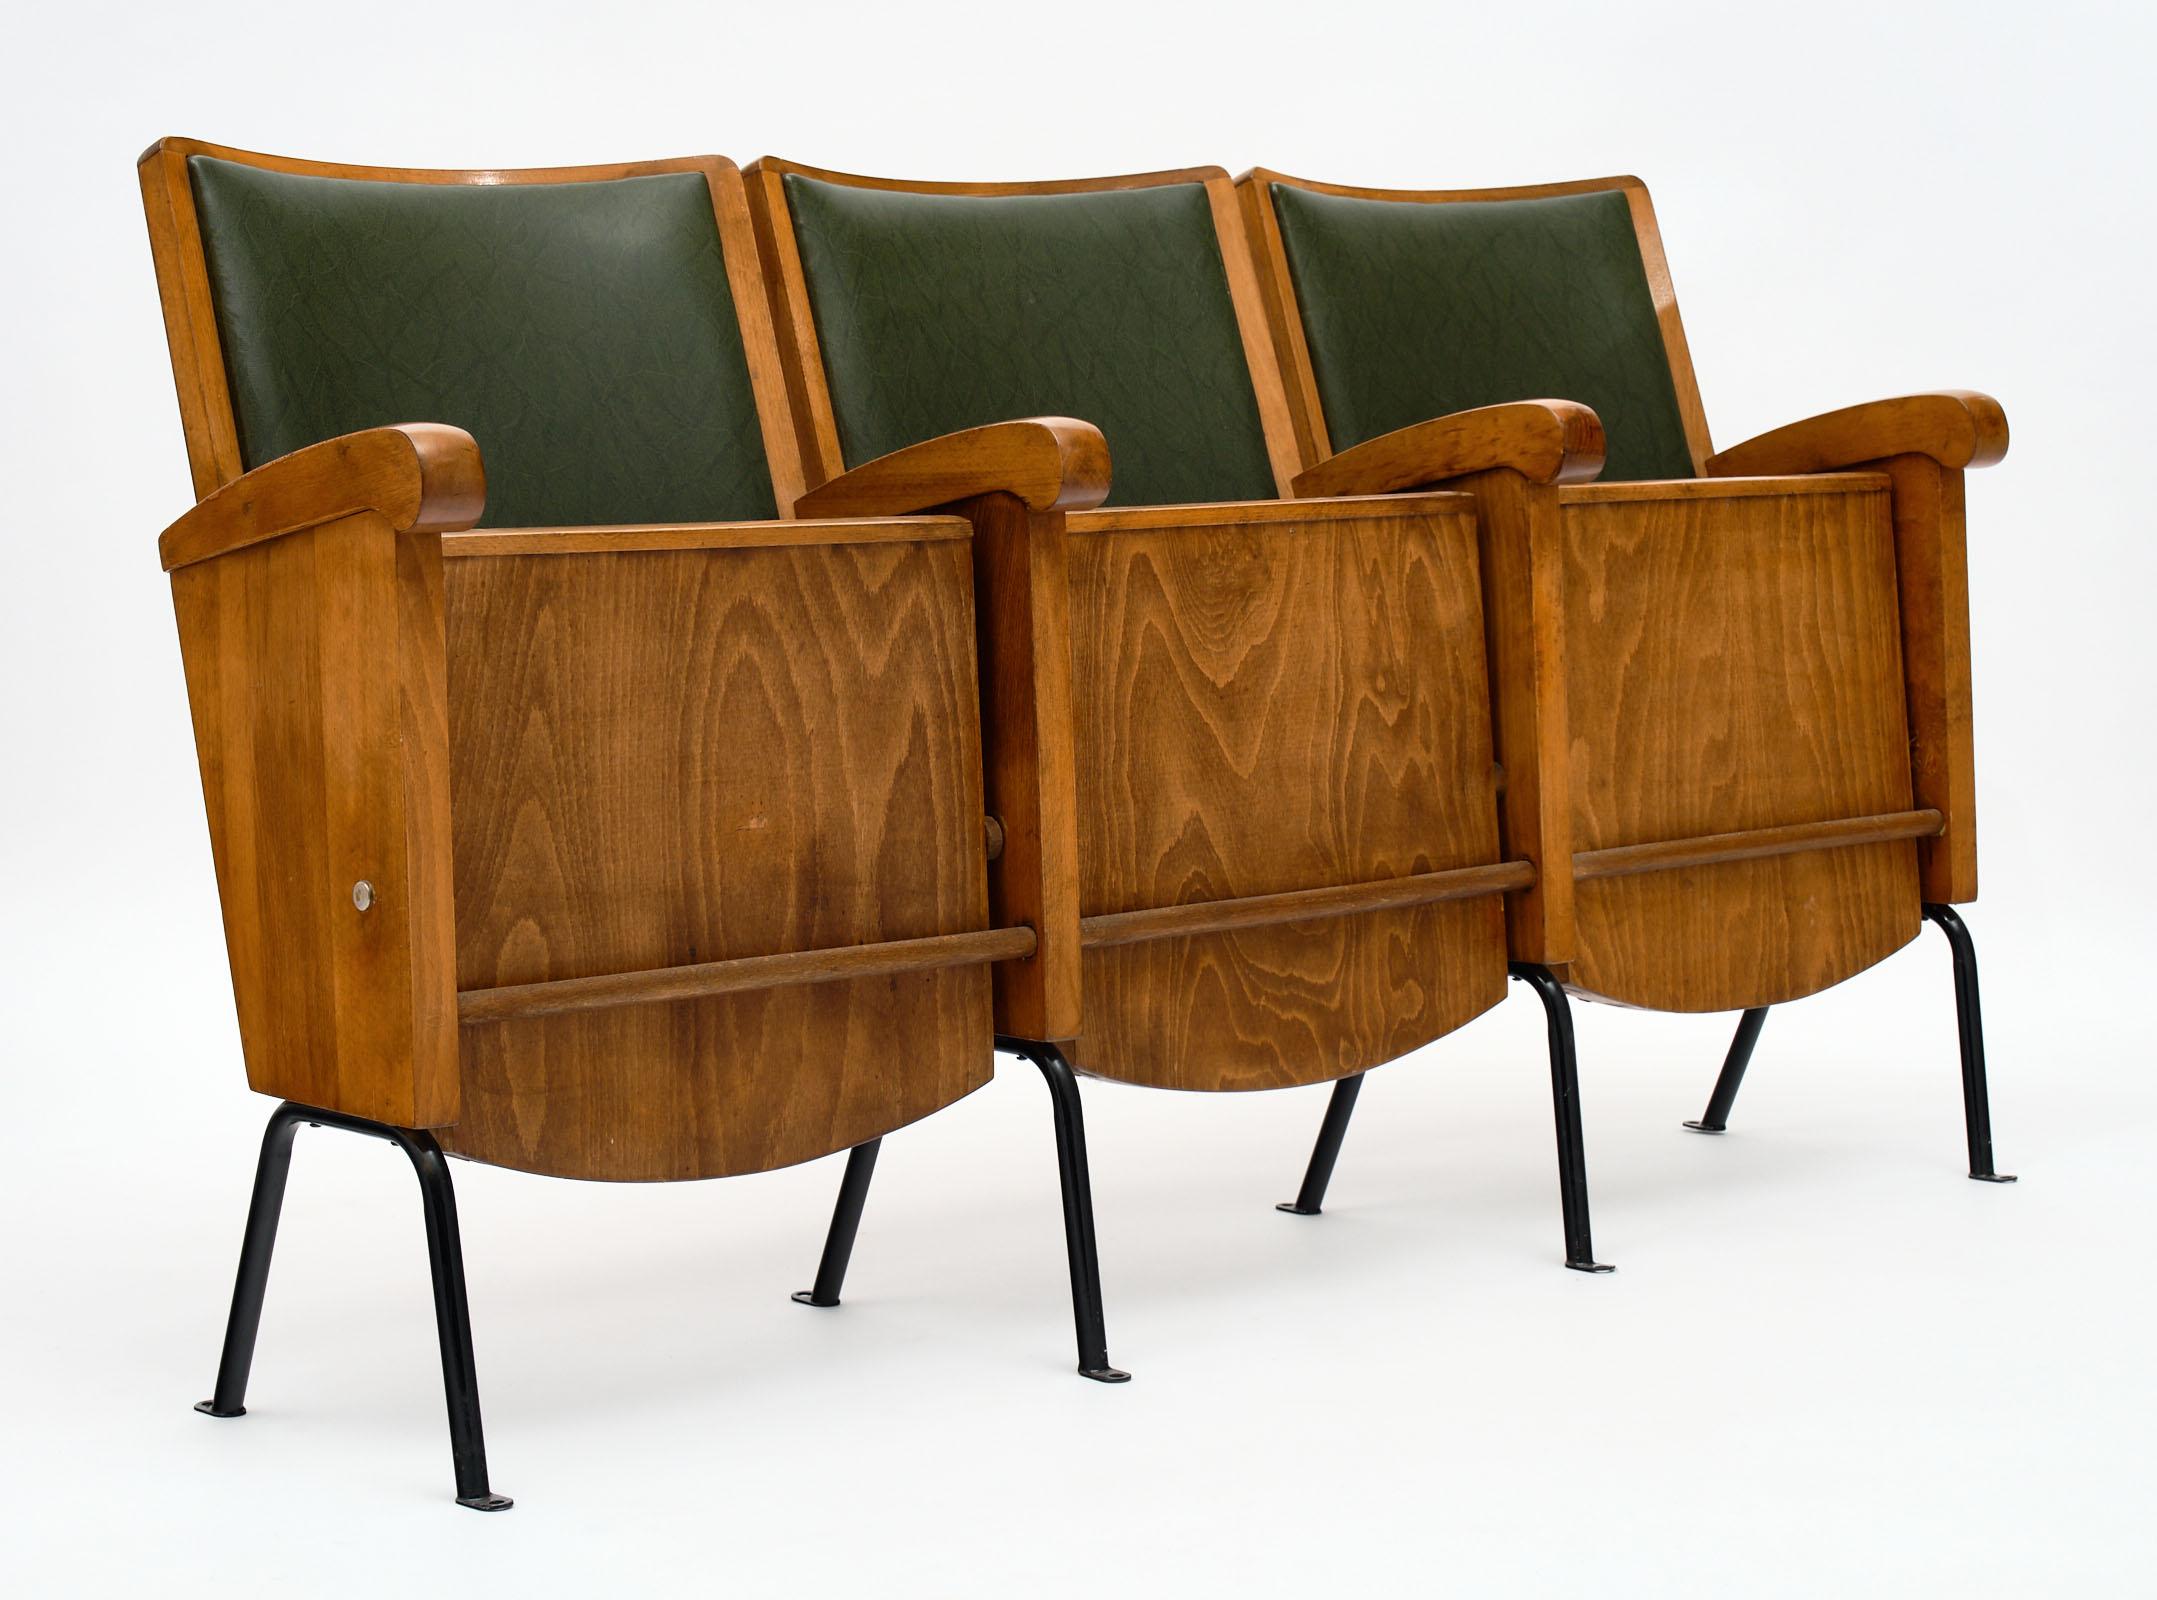 French vintage theater seats made of walnut and upholstered in the original green vinyl. The legs are metal. The row has three seats and the depth listed is when the seats are up. When down, the depth of the row is 24”. The height of the arms is